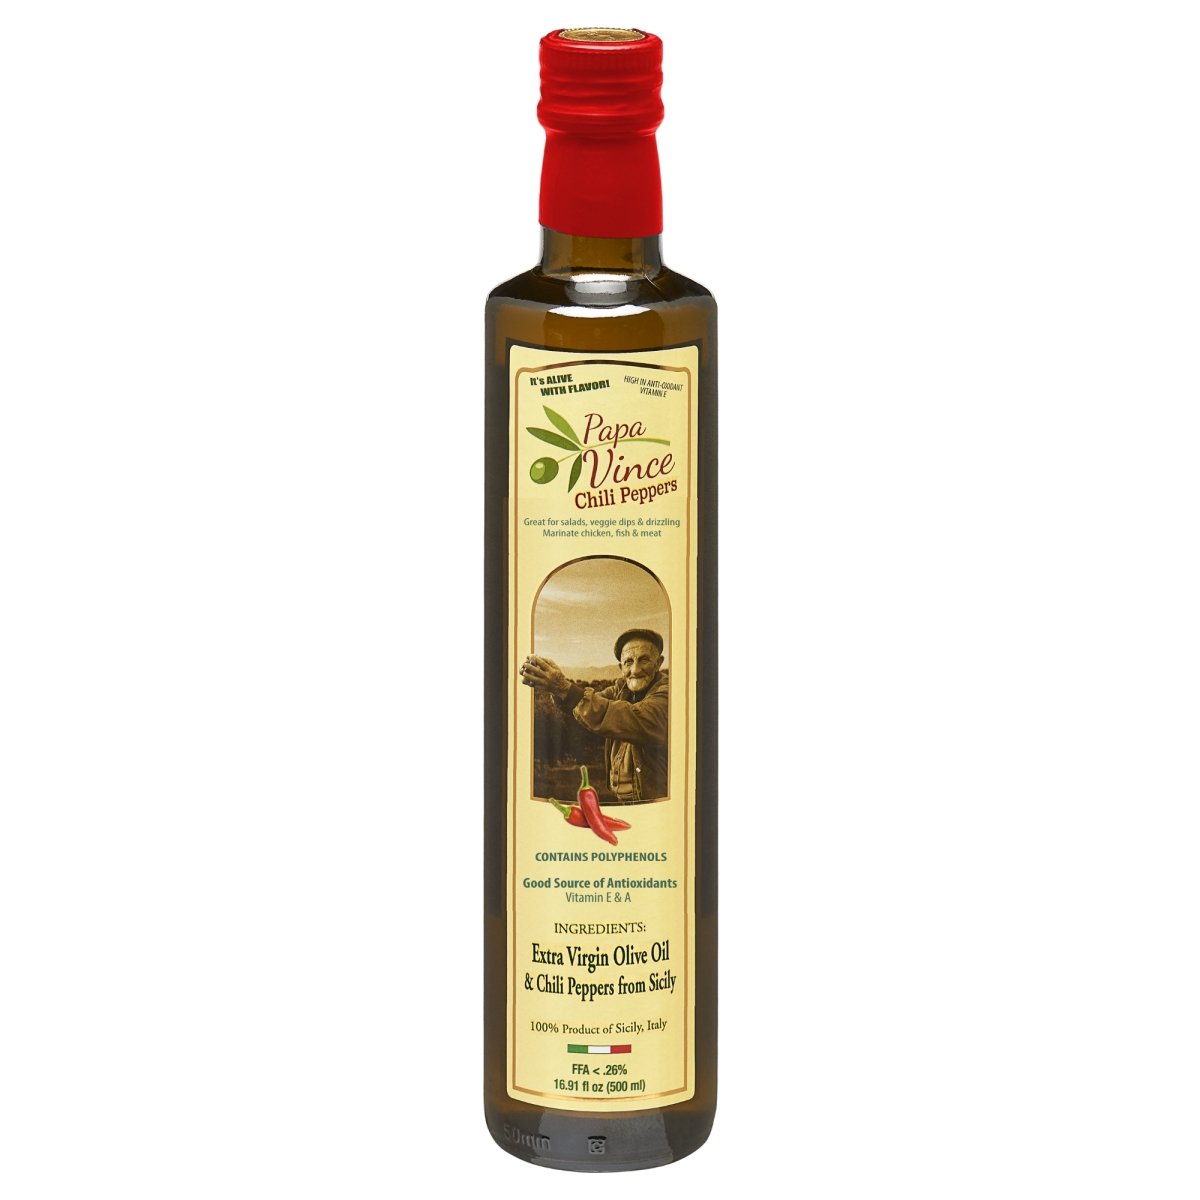 Chili Pepper Olive Oil Extra Virgin - Unblended, Single Estate, Single Source, Single Family Sicily Italy, Harvest Dec 2020/2021, First Cold Pressed, High in Antioxidants, Polyphenol Rich, Unfiltered, Unrefined - Papa Vince